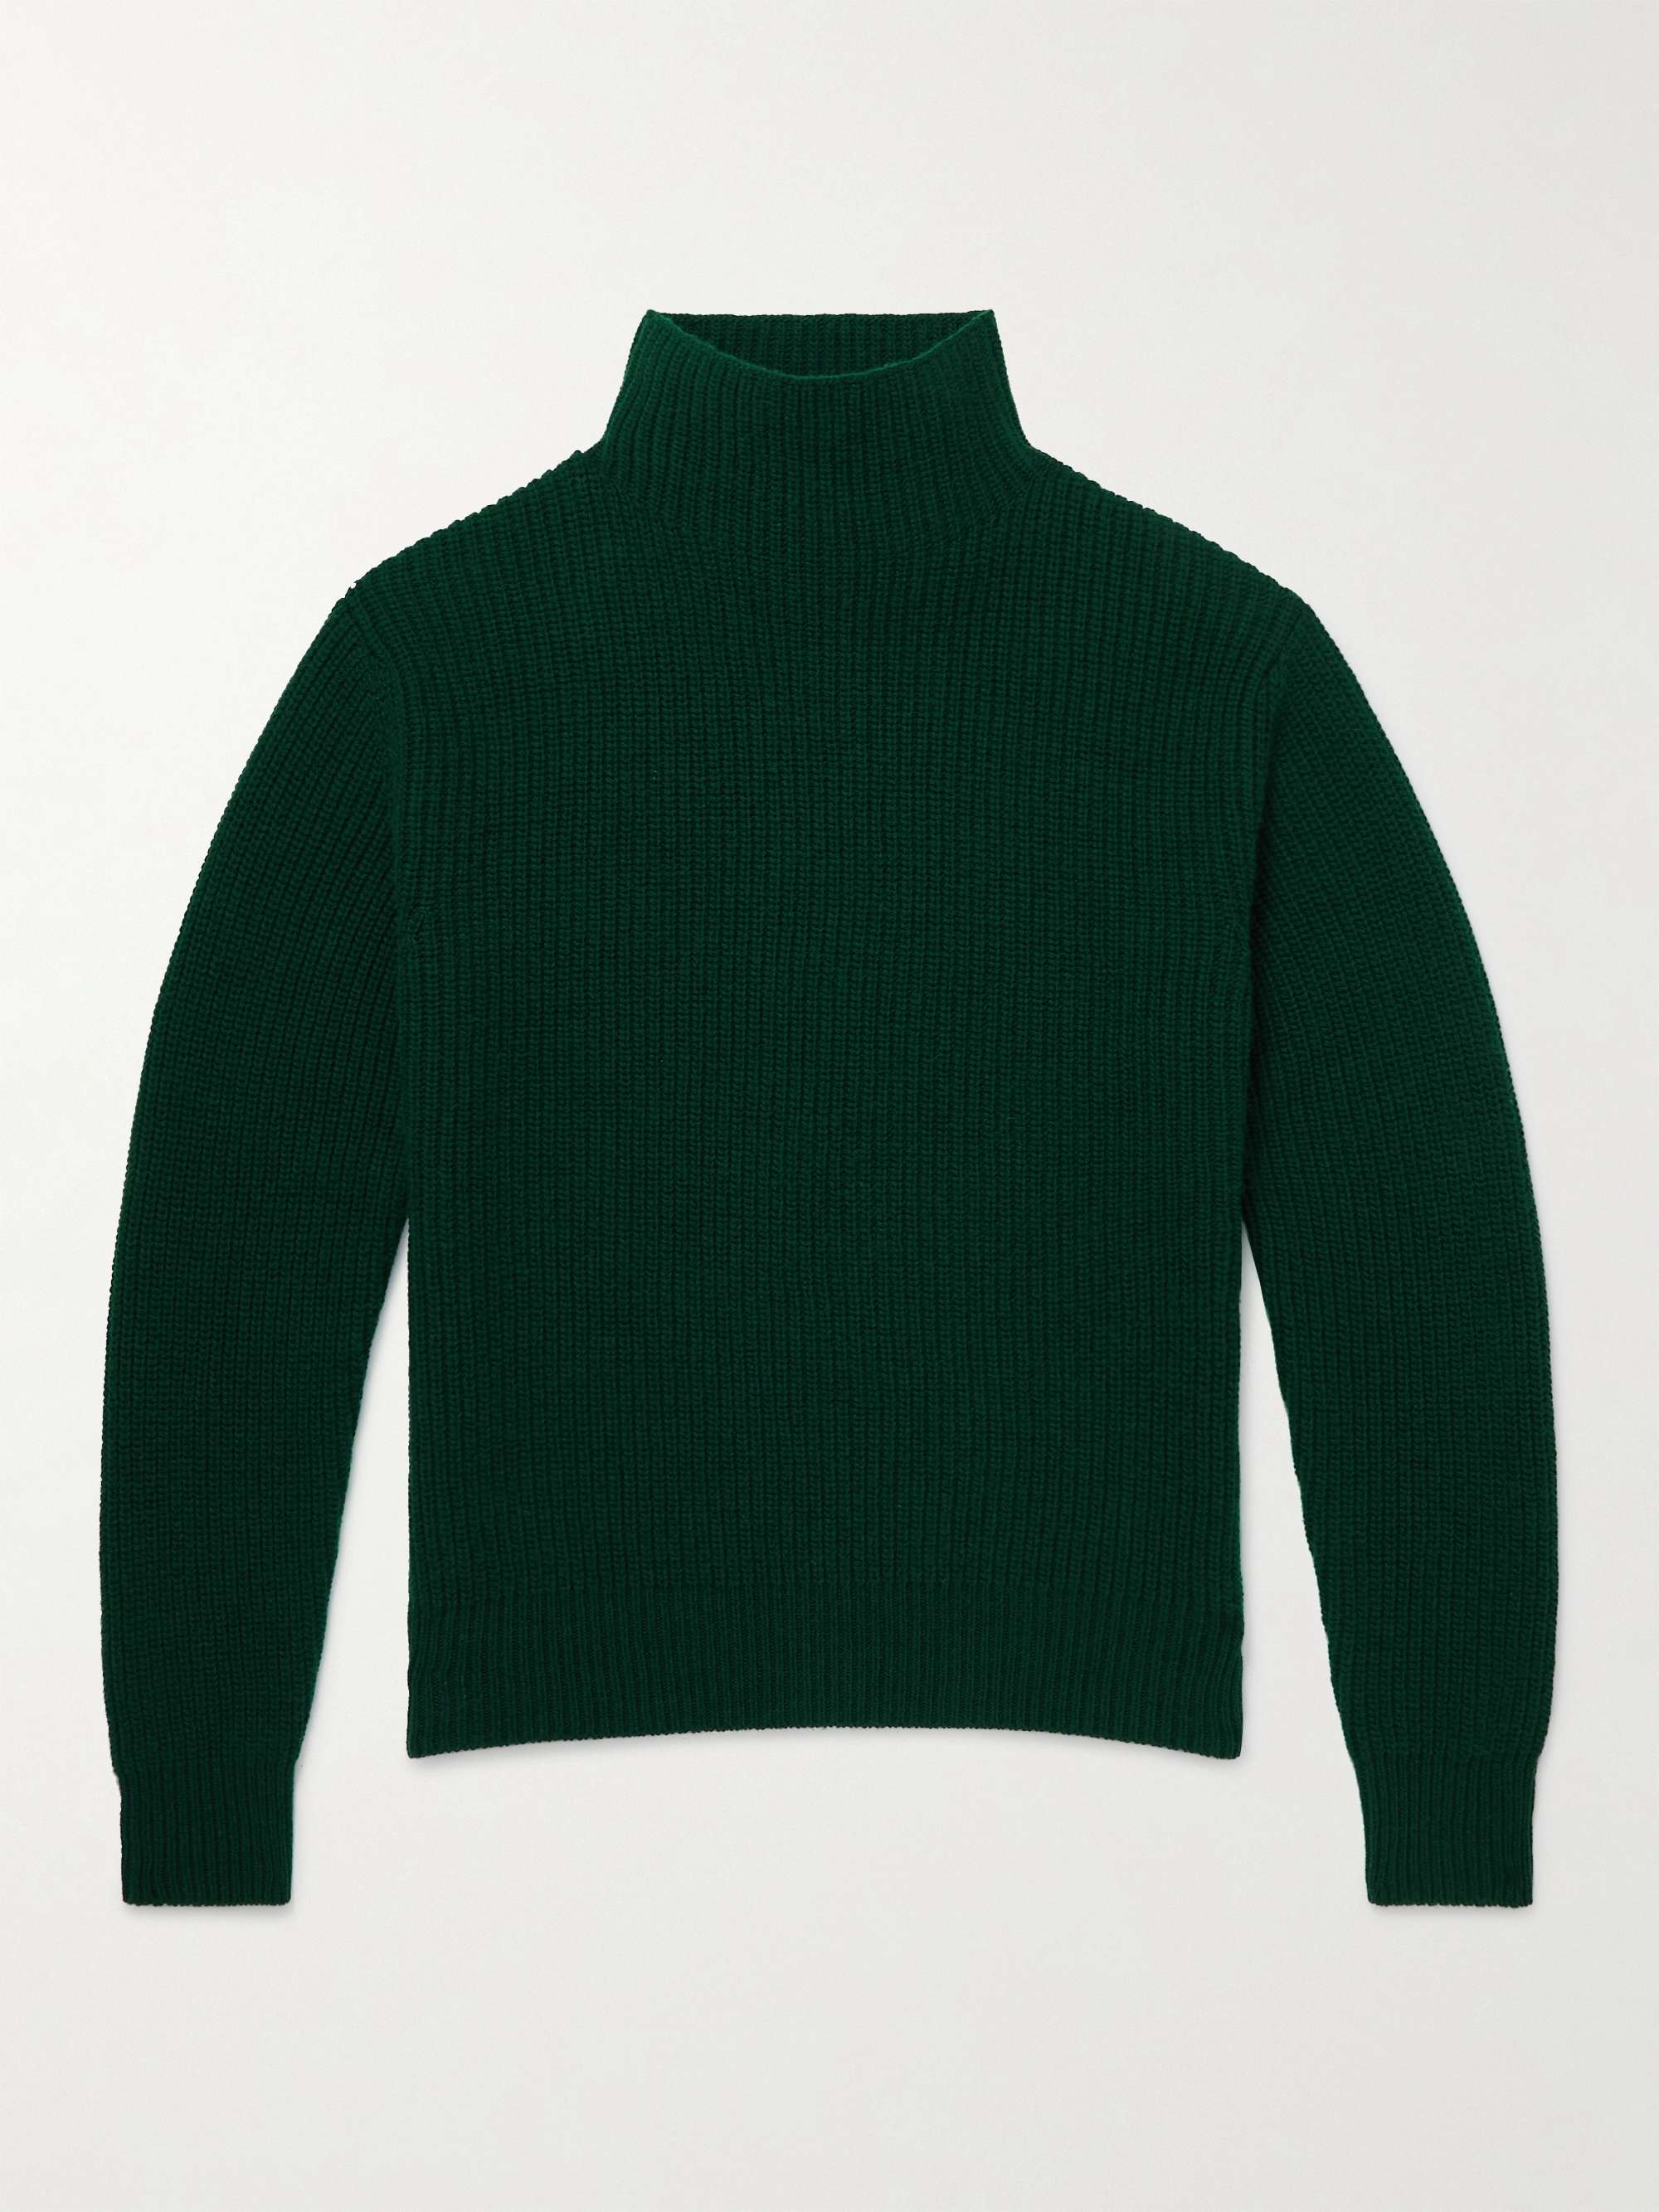 MR P. Stand-Collar Ribbed Virgin Wool Sweater